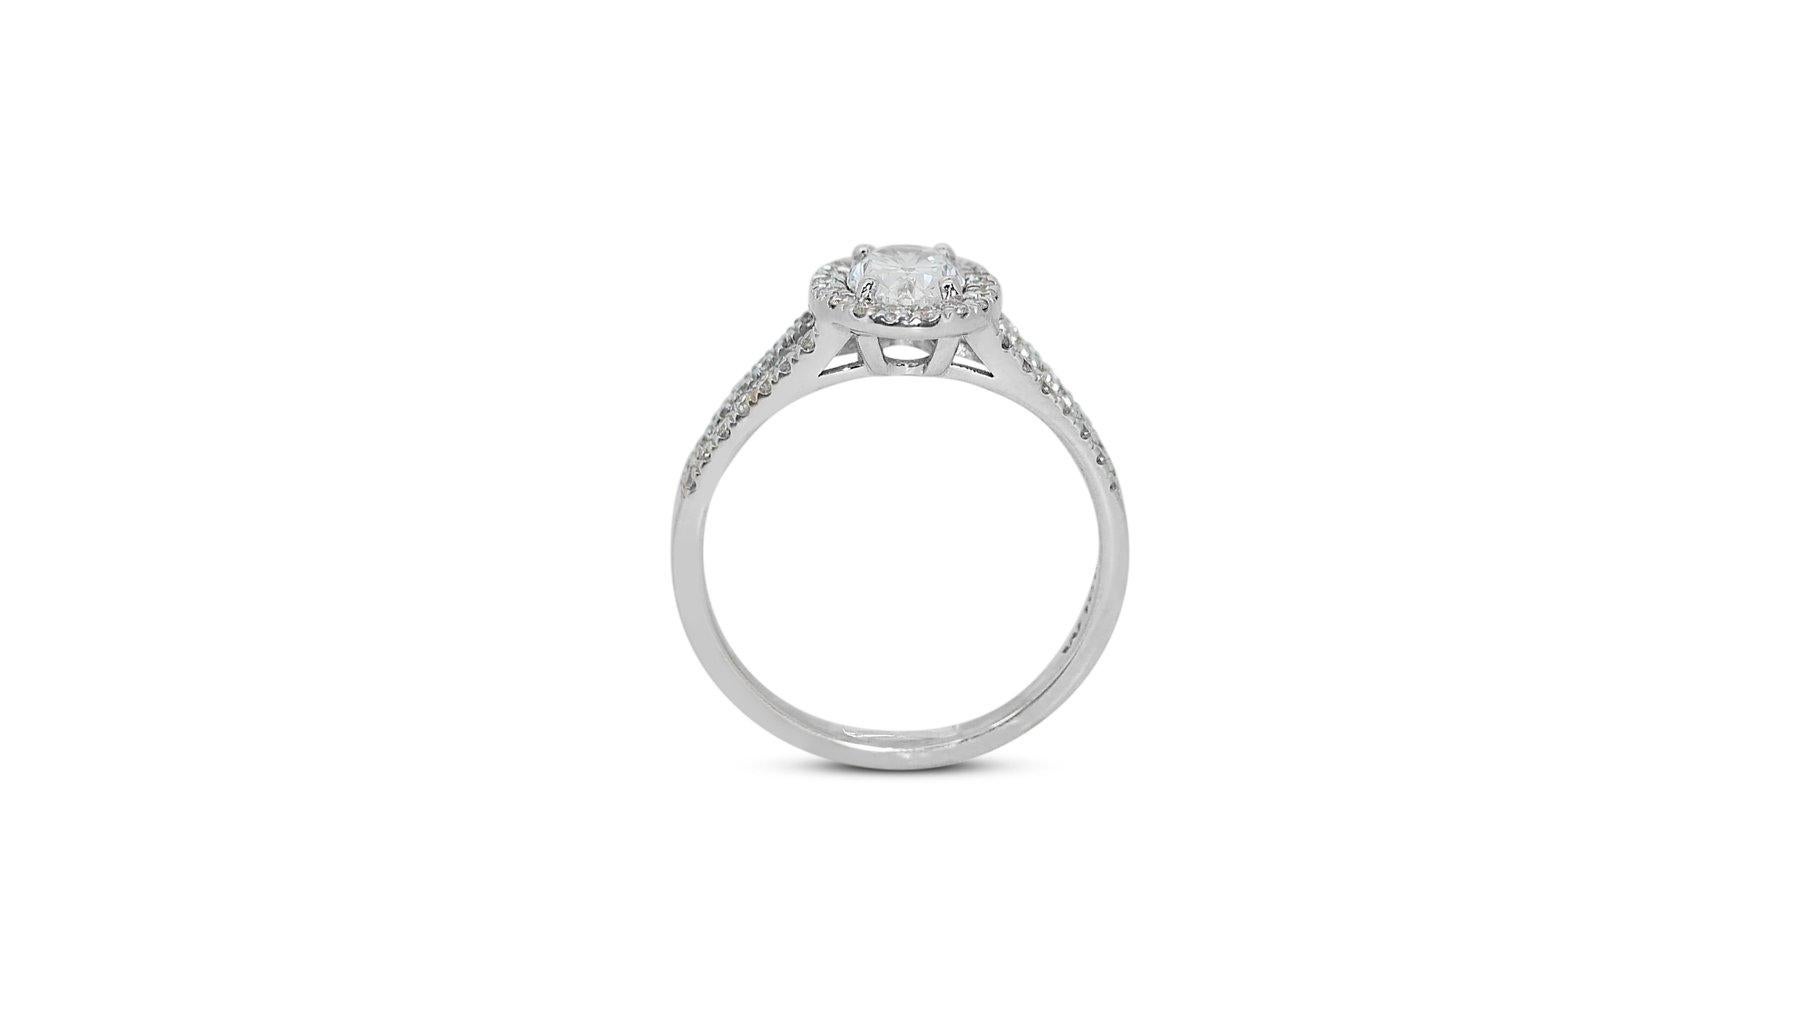 Glamorous 1.30ct Oval Diamond Halo Ring in 18K White Gold - GIA Certified In New Condition For Sale In רמת גן, IL